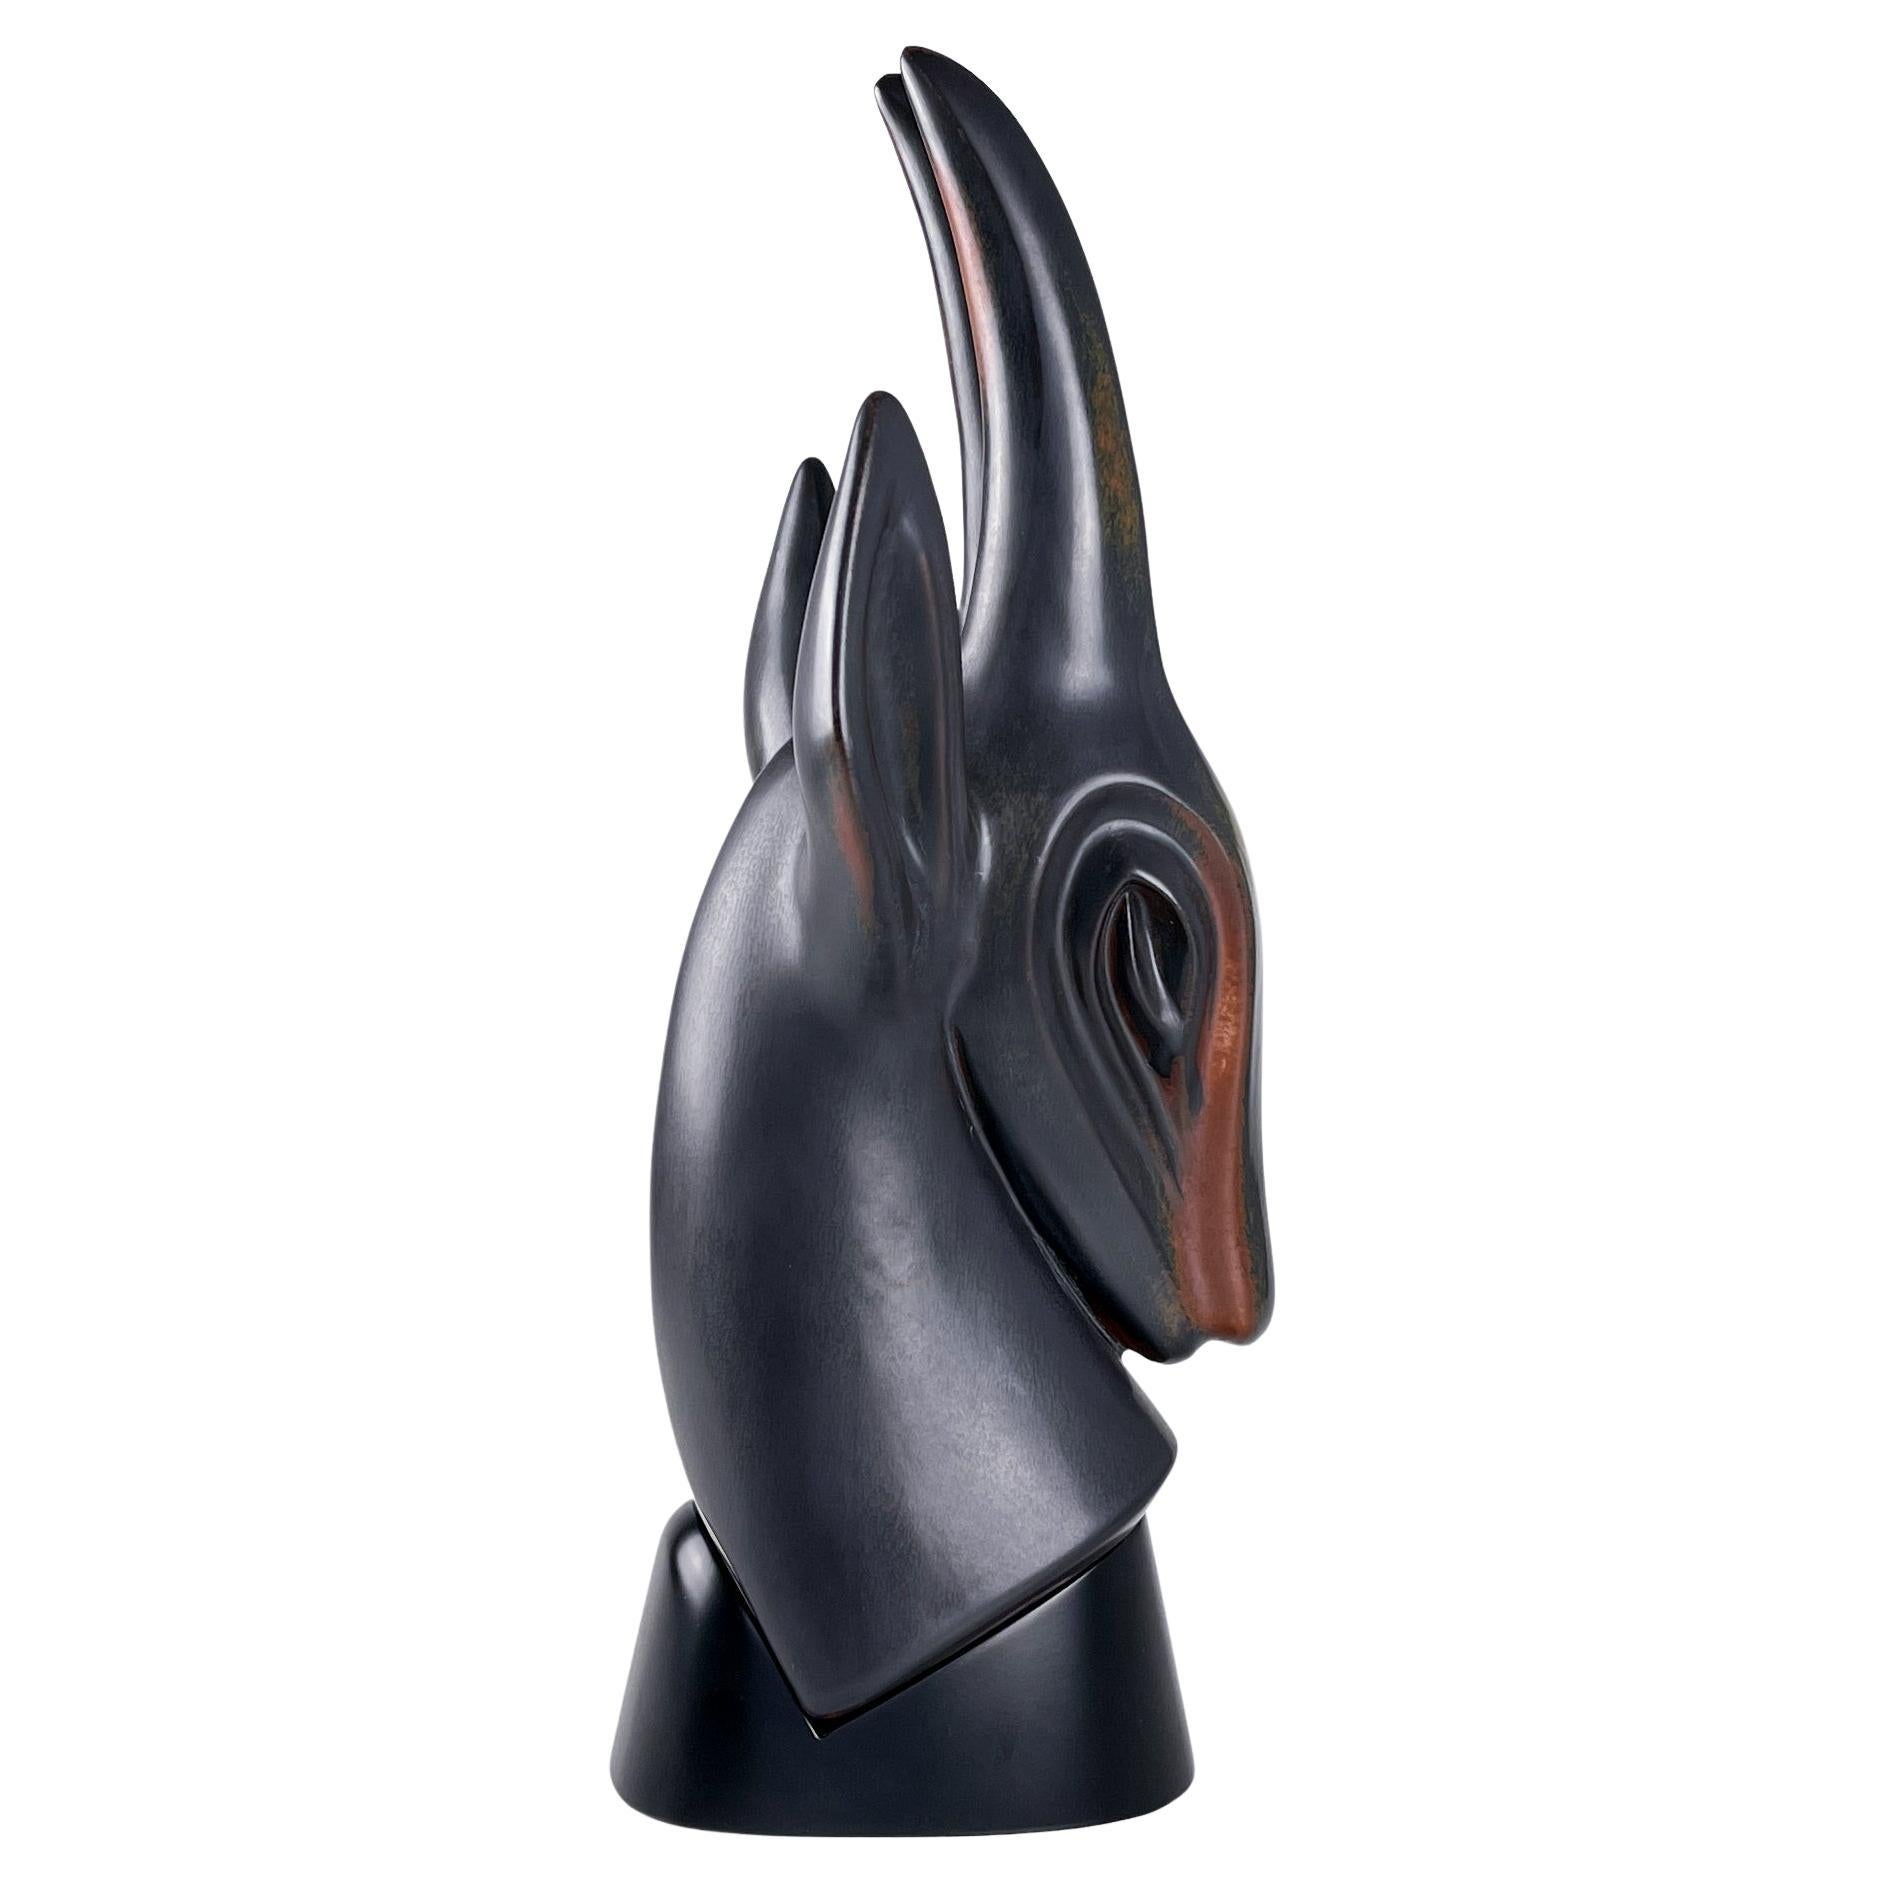 Gunnar Nylund, Stoneware Sculpture of an Antilope, Rörstrand, Sweden, circa 1955

Description
A large stoneware sculpture of an Antilope, finished in matte reddish brown and dark brown glazes on a satin-gloss black lacquered wooden base, made in